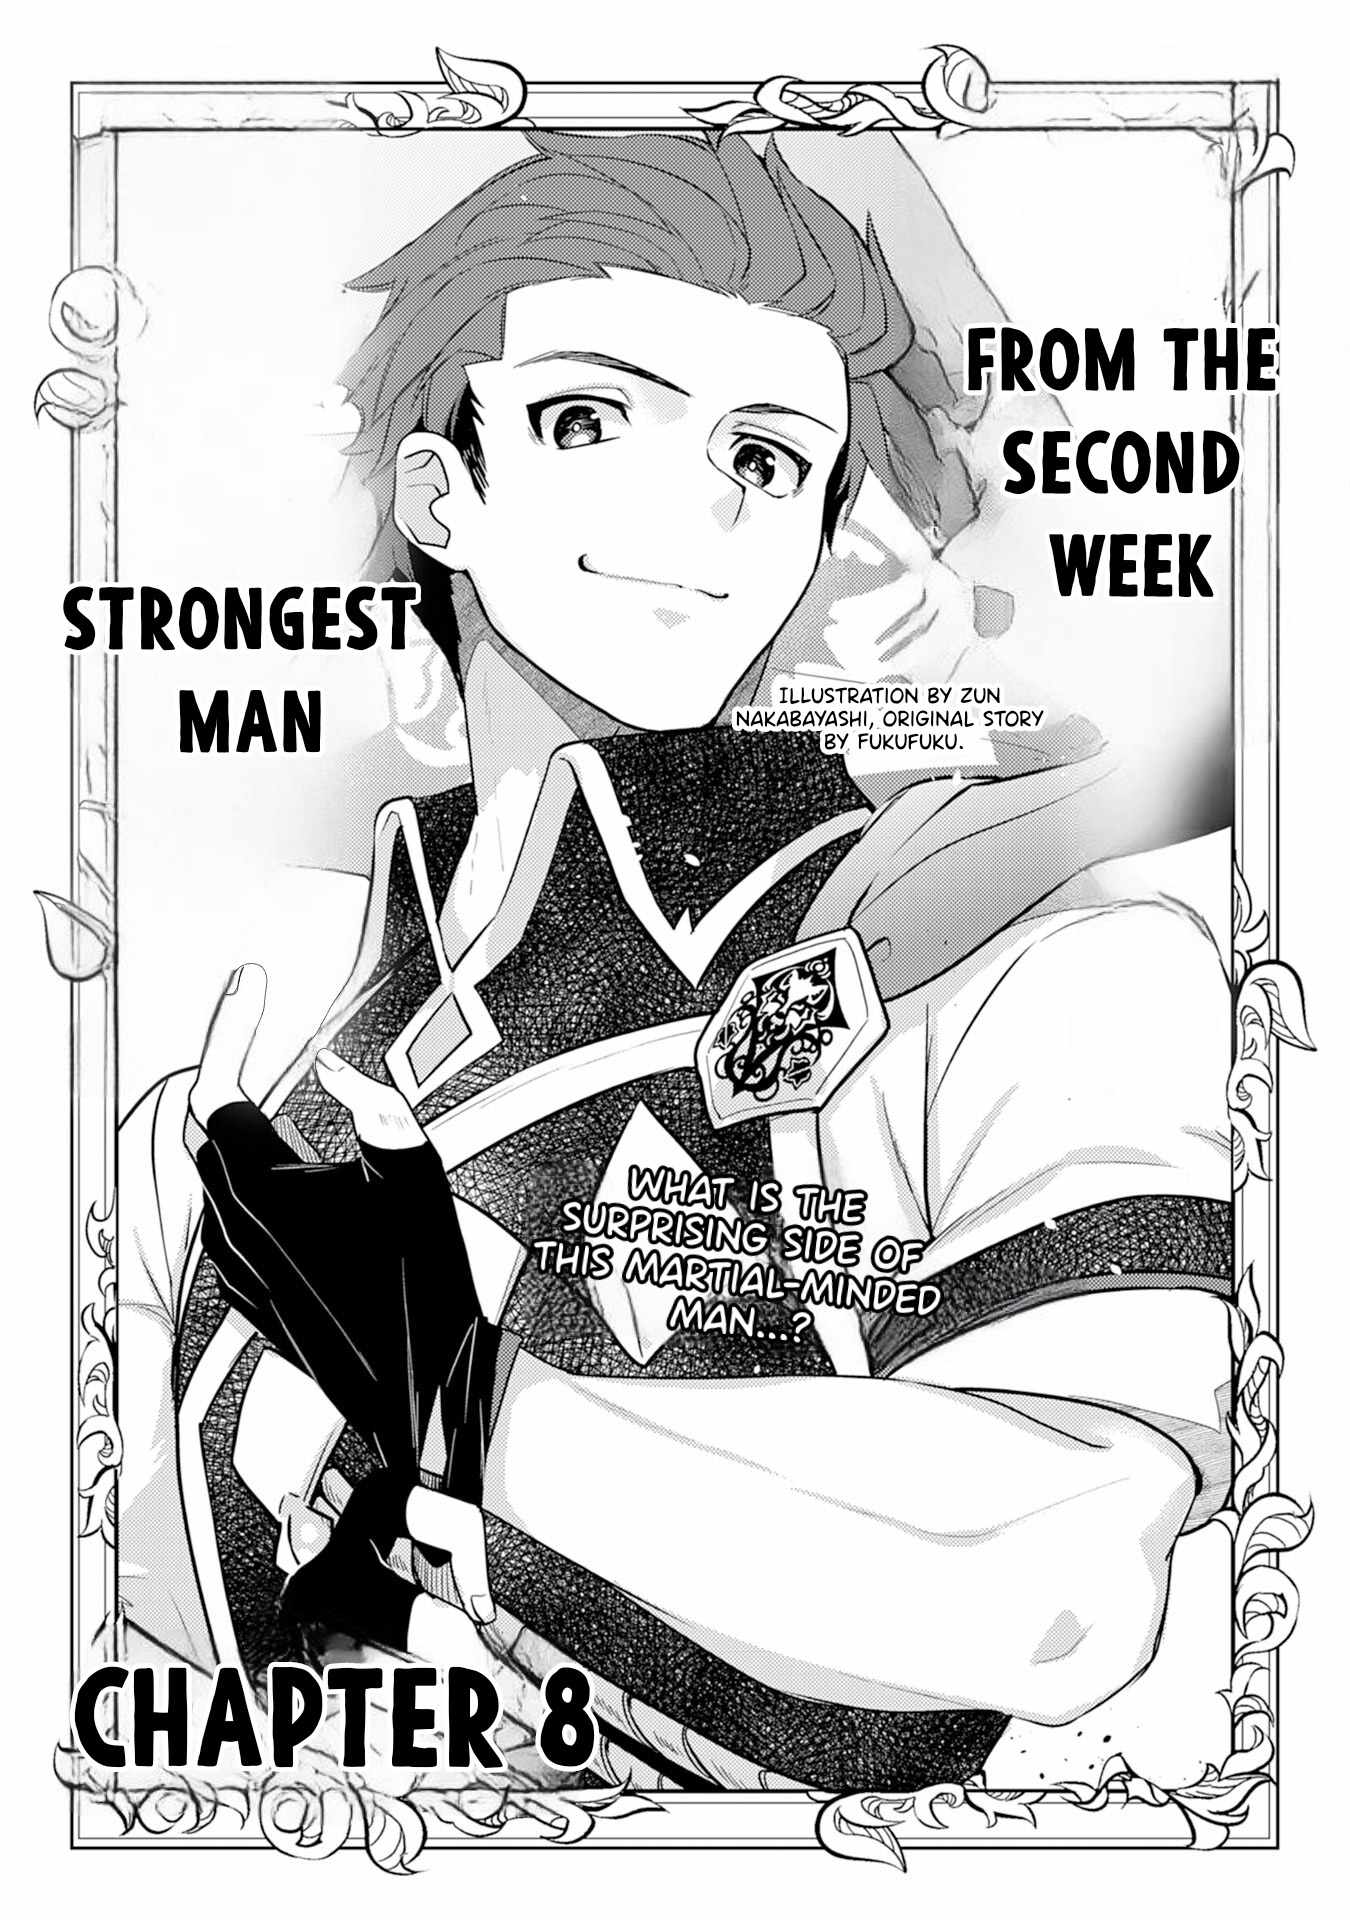 The Strongest Man, Born From Misfortune Chapter 8